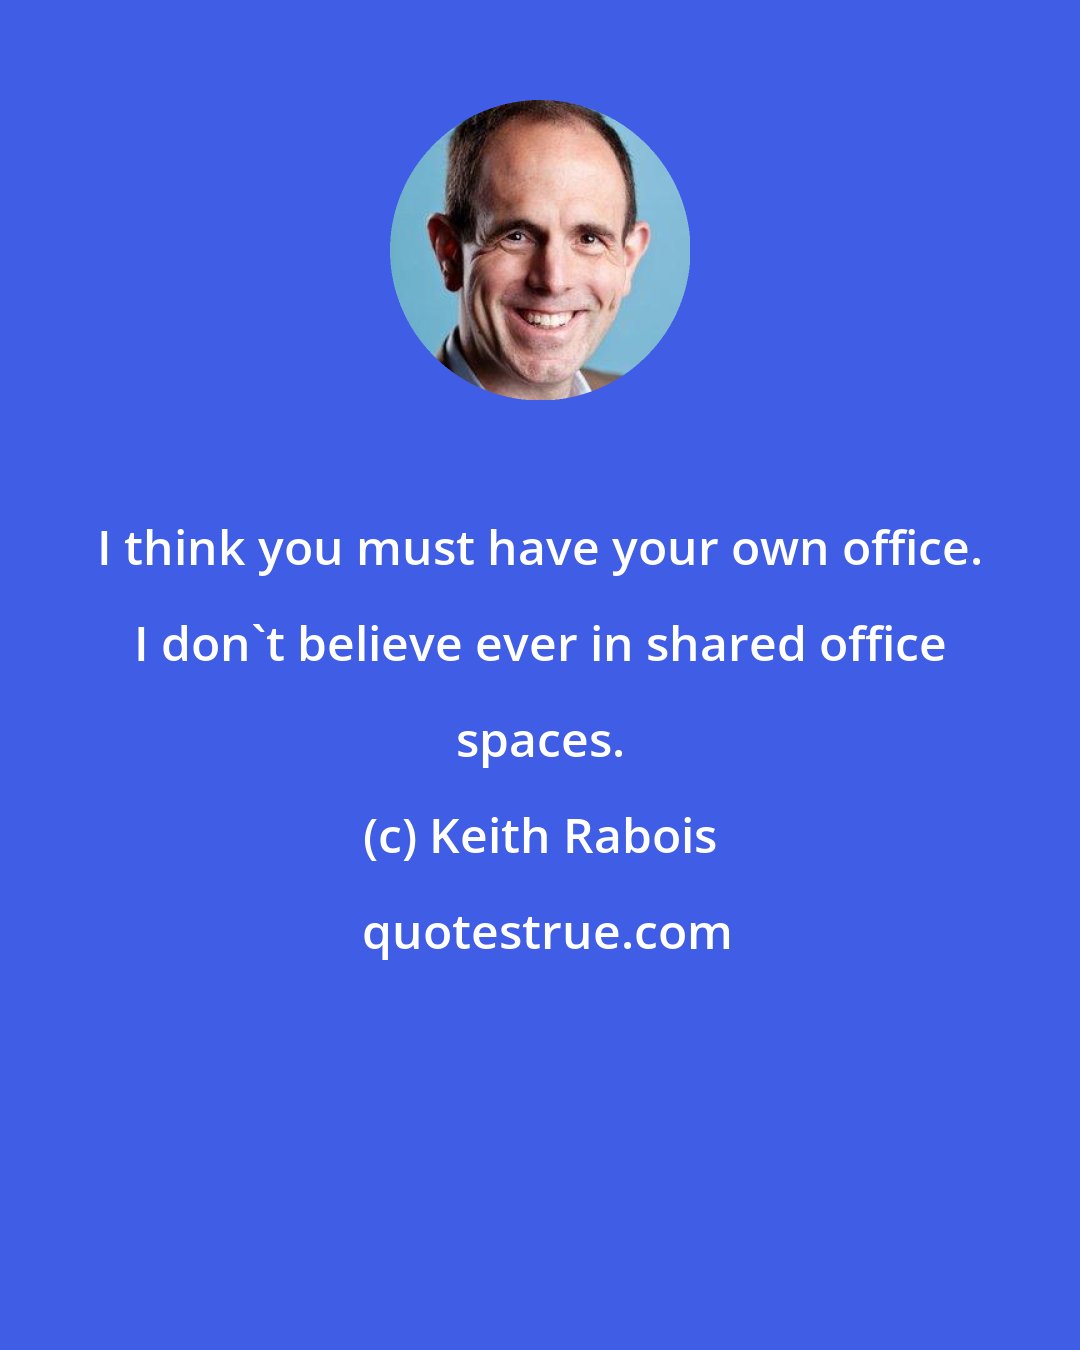 Keith Rabois: I think you must have your own office. I don't believe ever in shared office spaces.